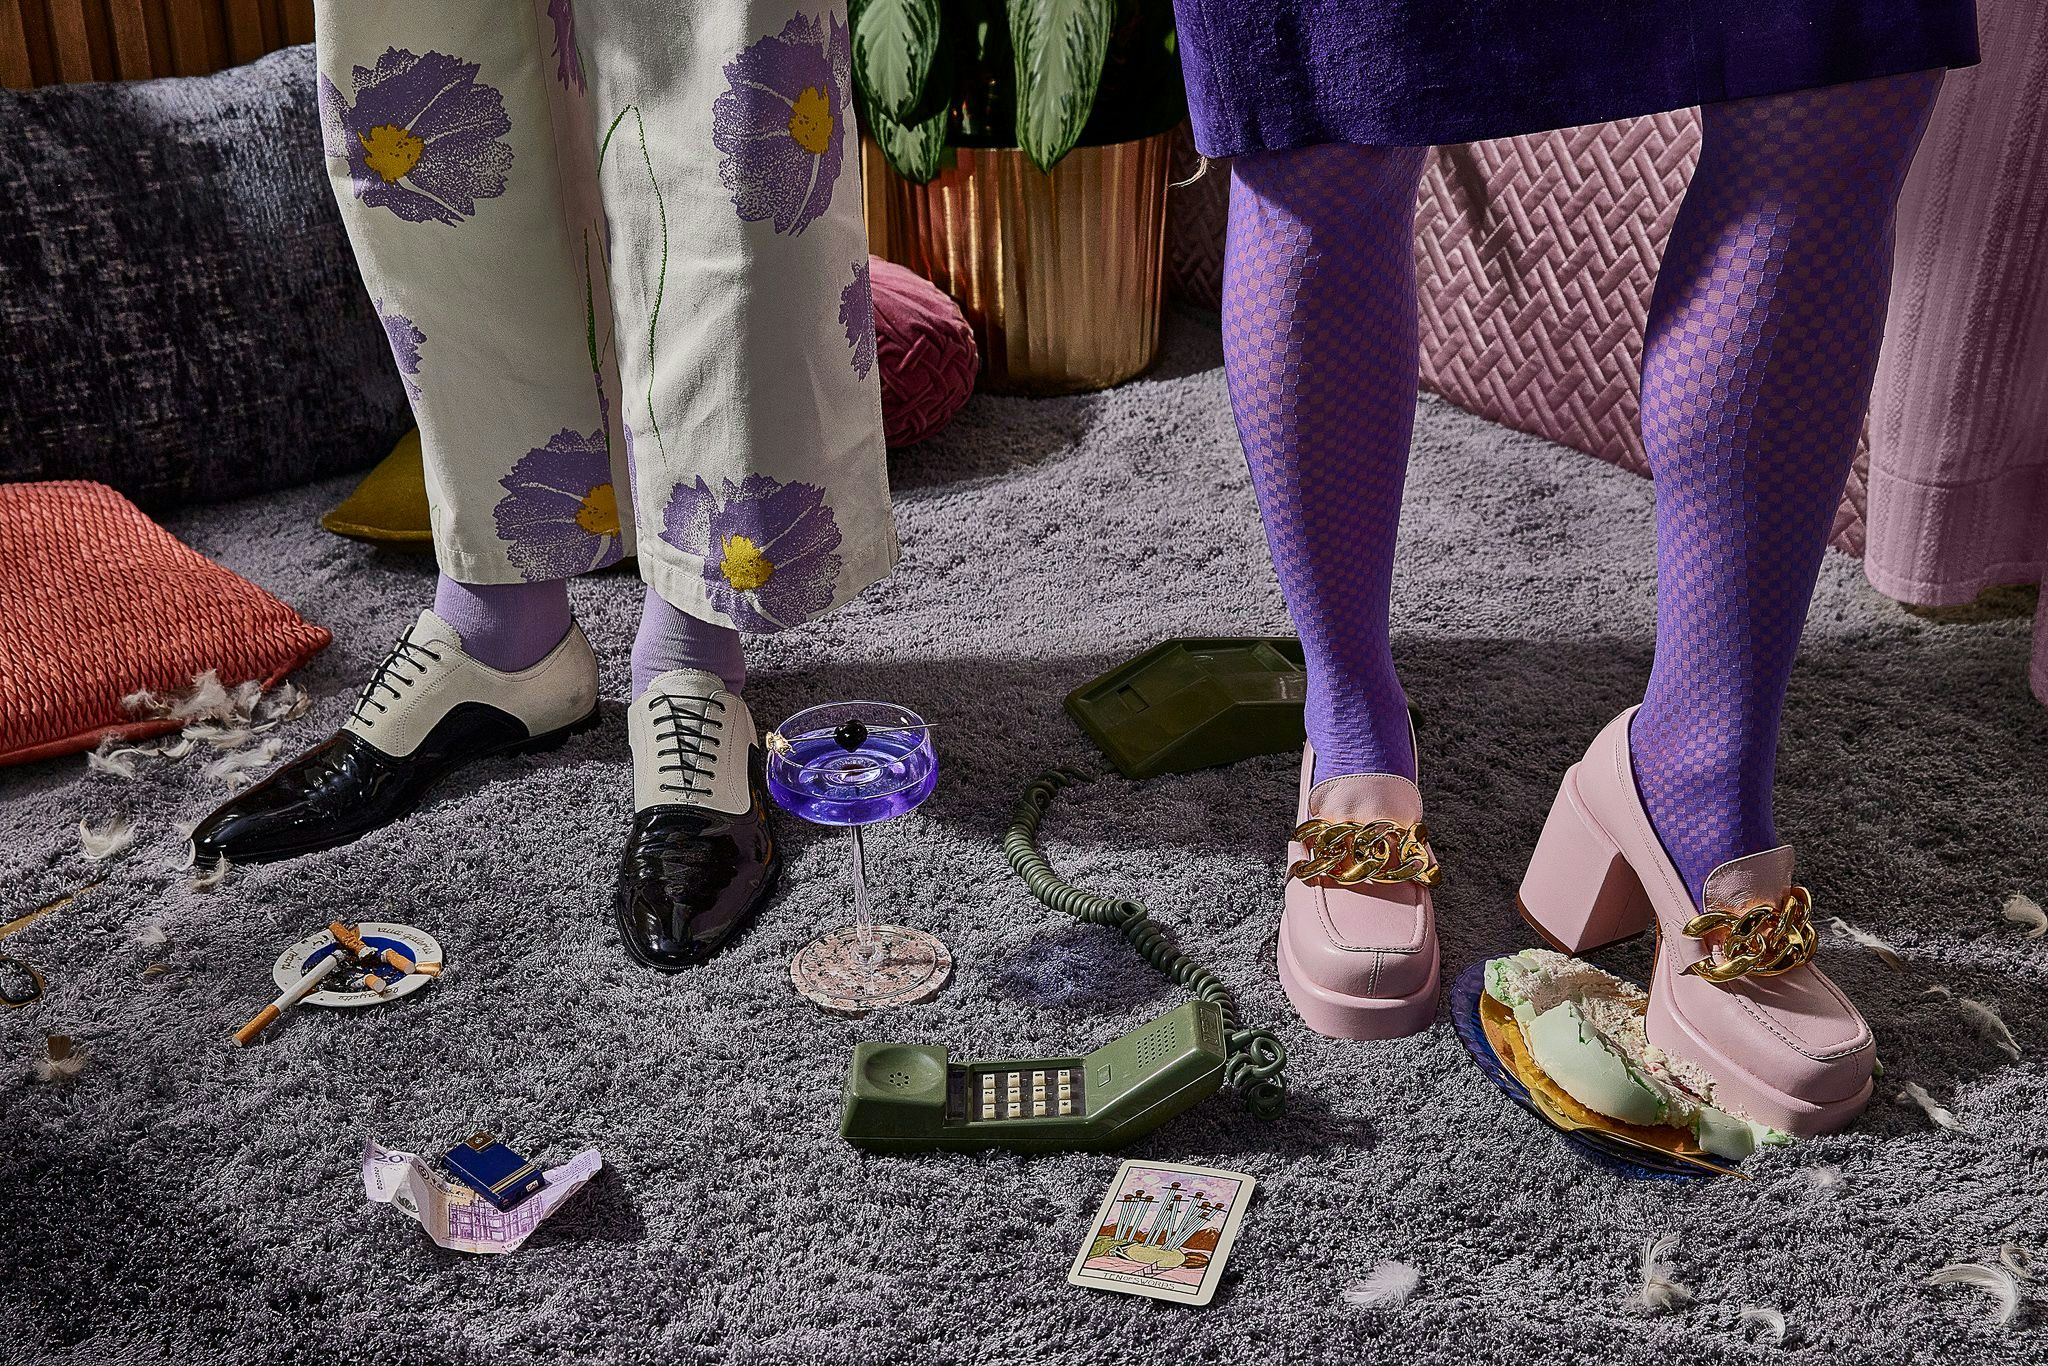 Lower legs of two in retro chic clothes, one stepping on a macaron on an elegant carpet.